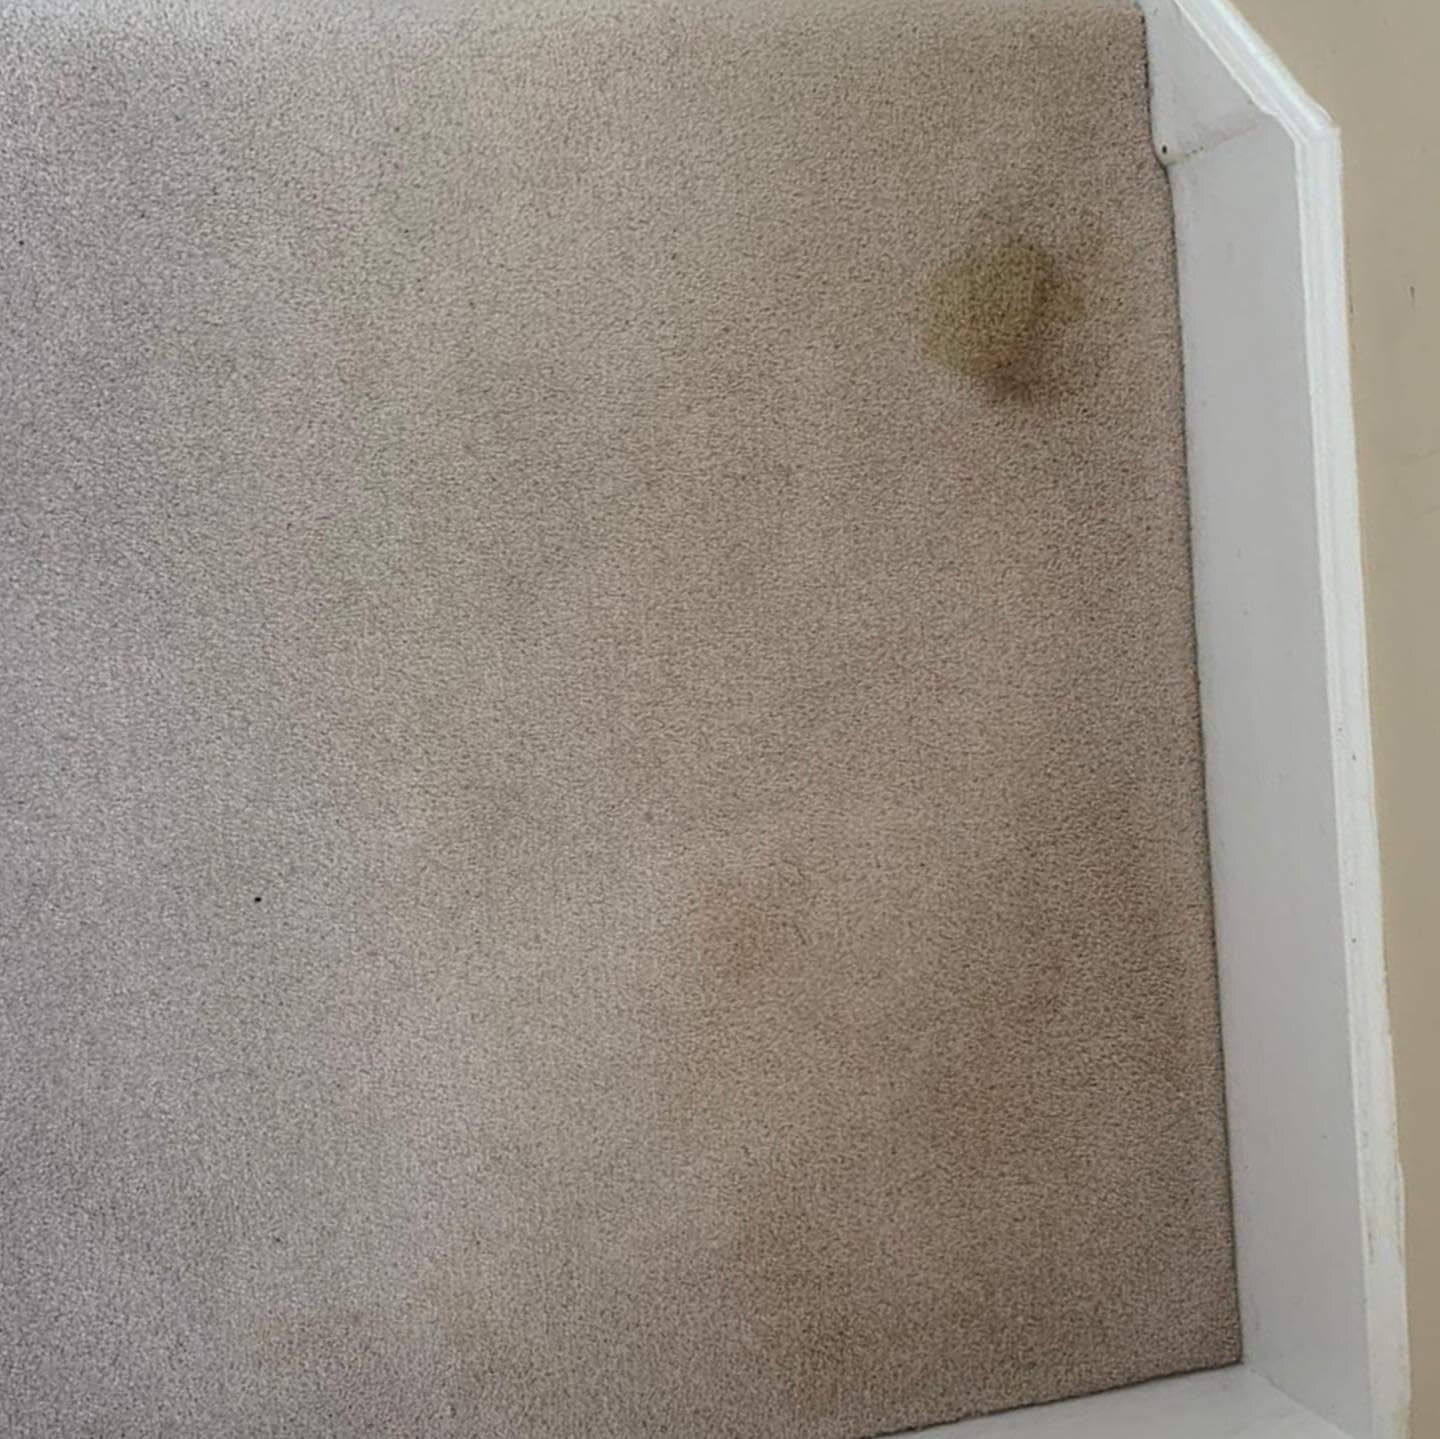 Swipe to remove the stain. This customer had been trying to remove this stain for months! They called our team of specialists in and it disappeared in seconds! Book us for a clean and stain removal treatment 🧼 
______________________________________